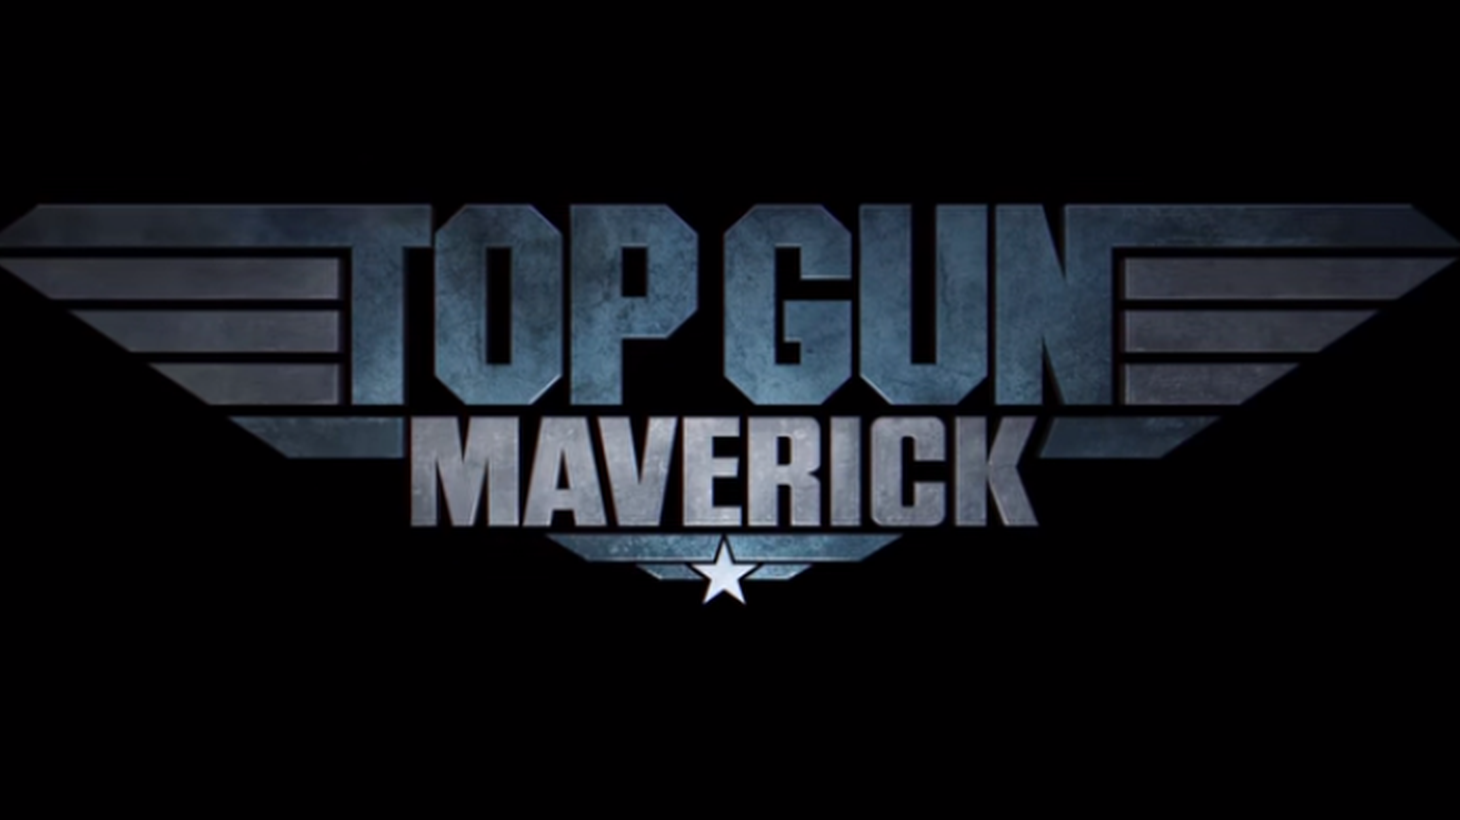 “Maverick in the first film was this hotshot, very immature guy who's always doing the wrong thing. And here, he's still that guy. And you get to see how that plays out in this future,” film reviewer Amy Nicholson says of “Top Gun: Maverick.”